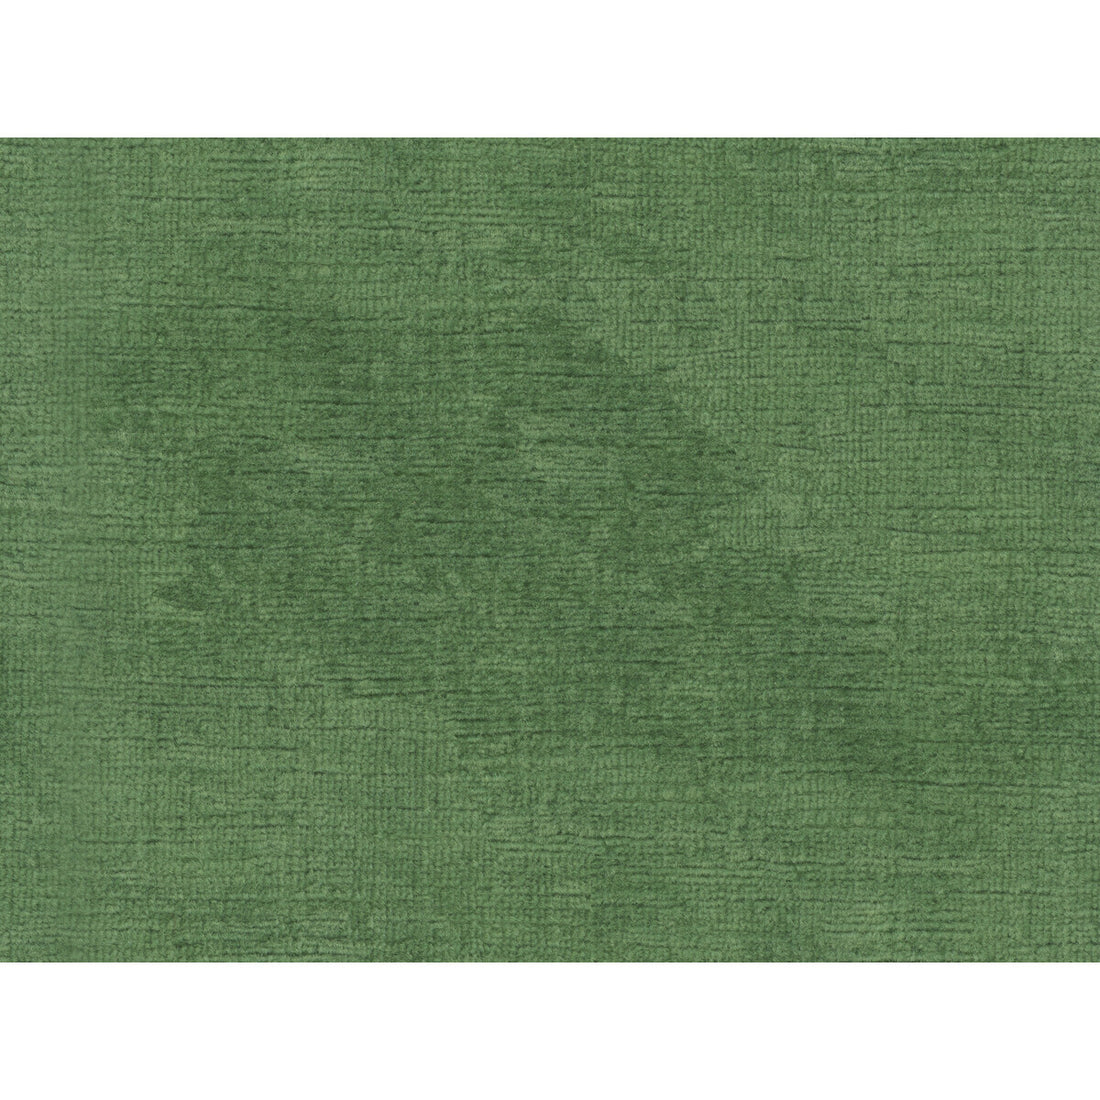 Fulham Linen V fabric in spearmint color - pattern 2016133.33.0 - by Lee Jofa